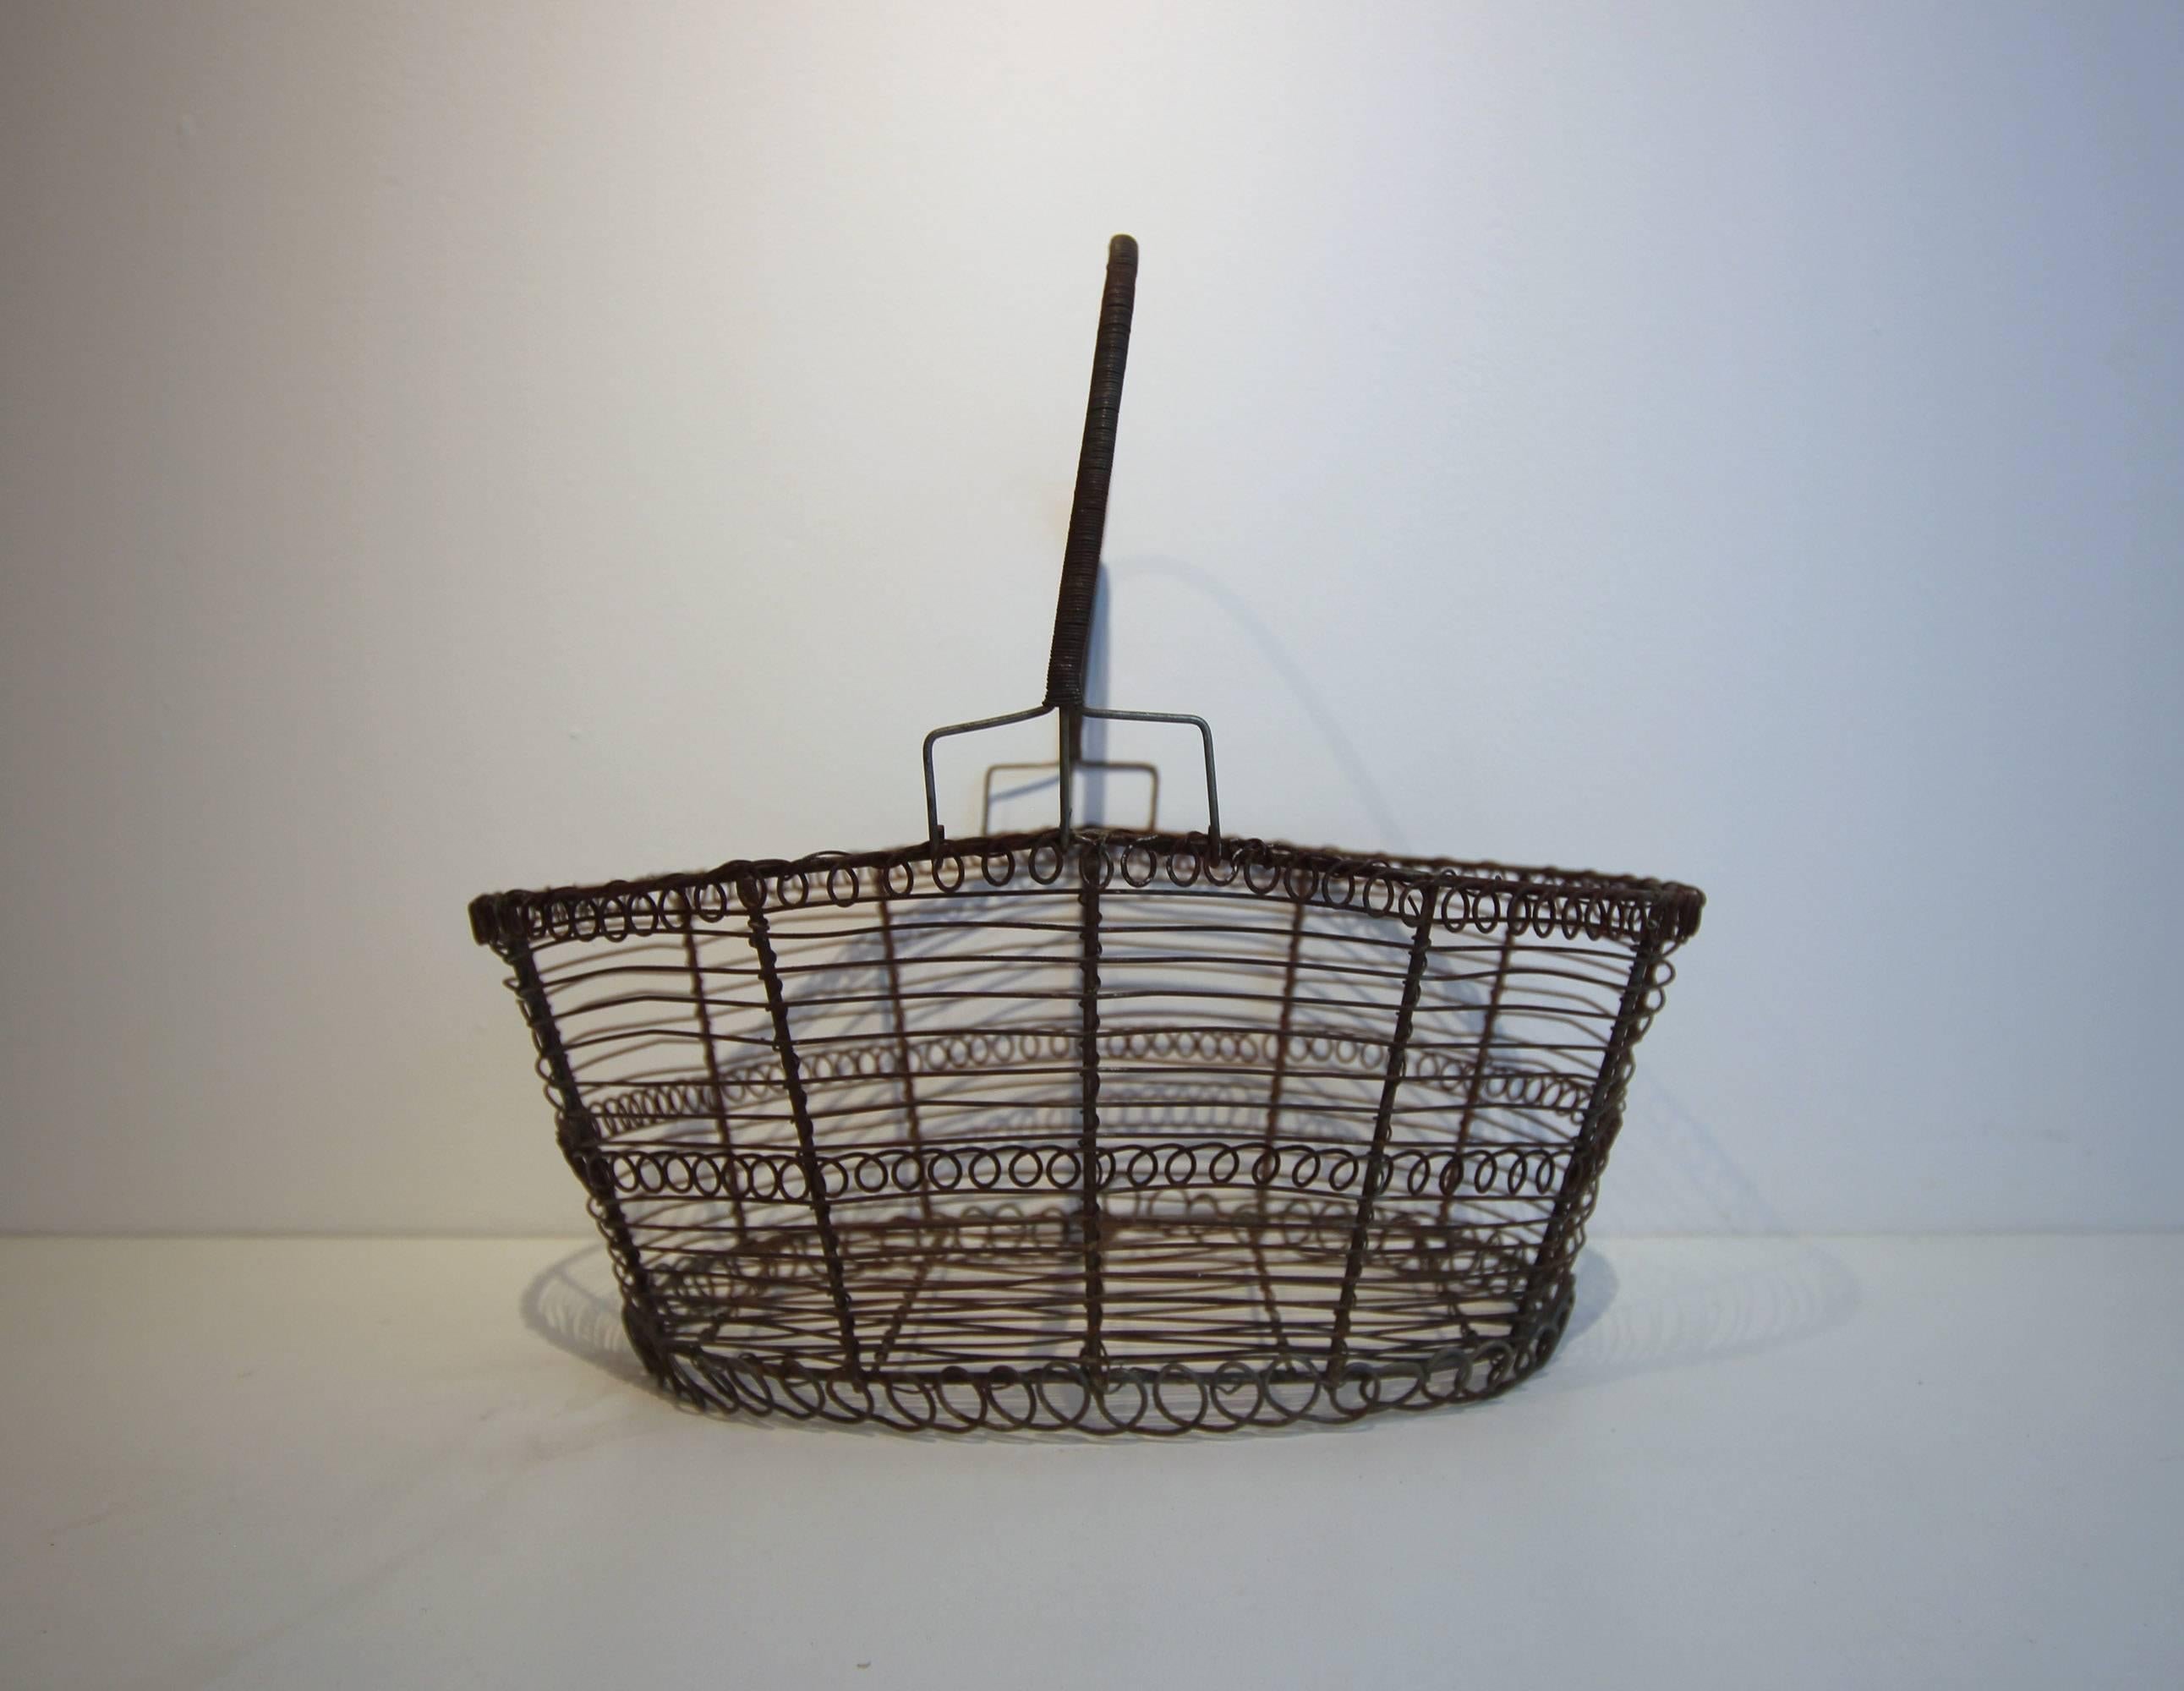 French wire basket with a tightly wound handle and great curlicue detail, circa 1900. Very sturdy, good patina.